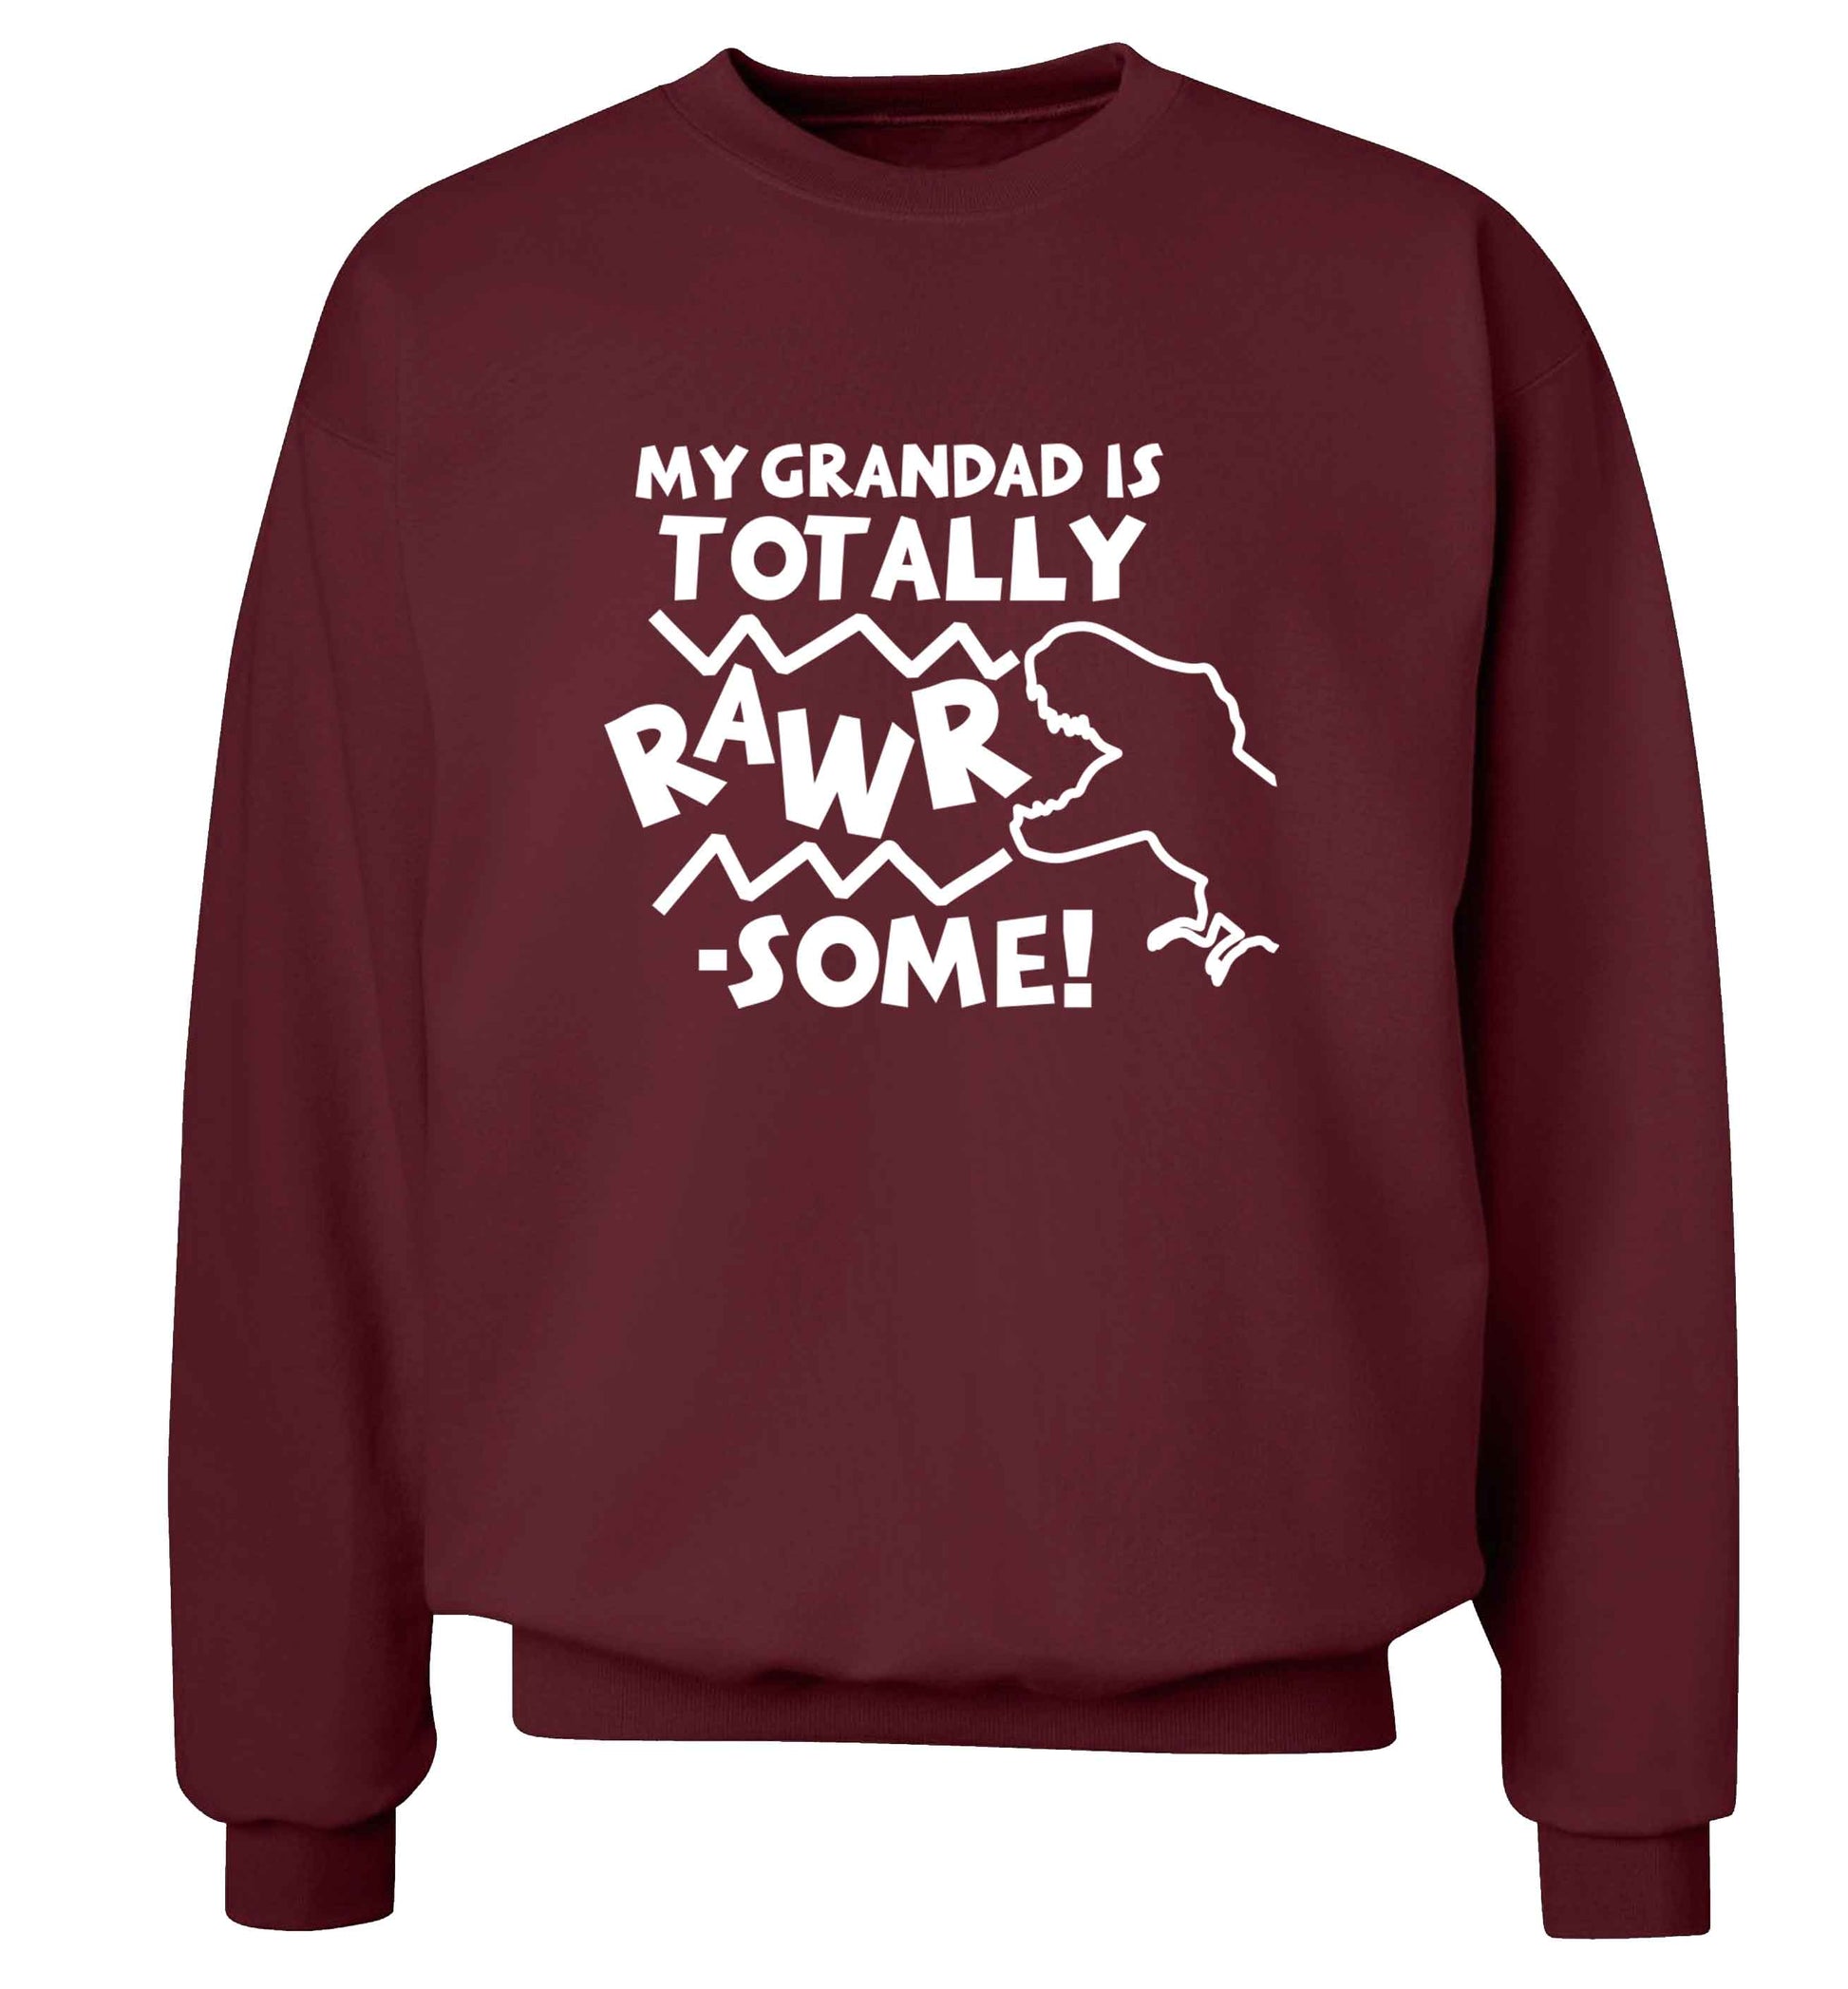 My grandad is totally rawrsome adult's unisex maroon sweater 2XL